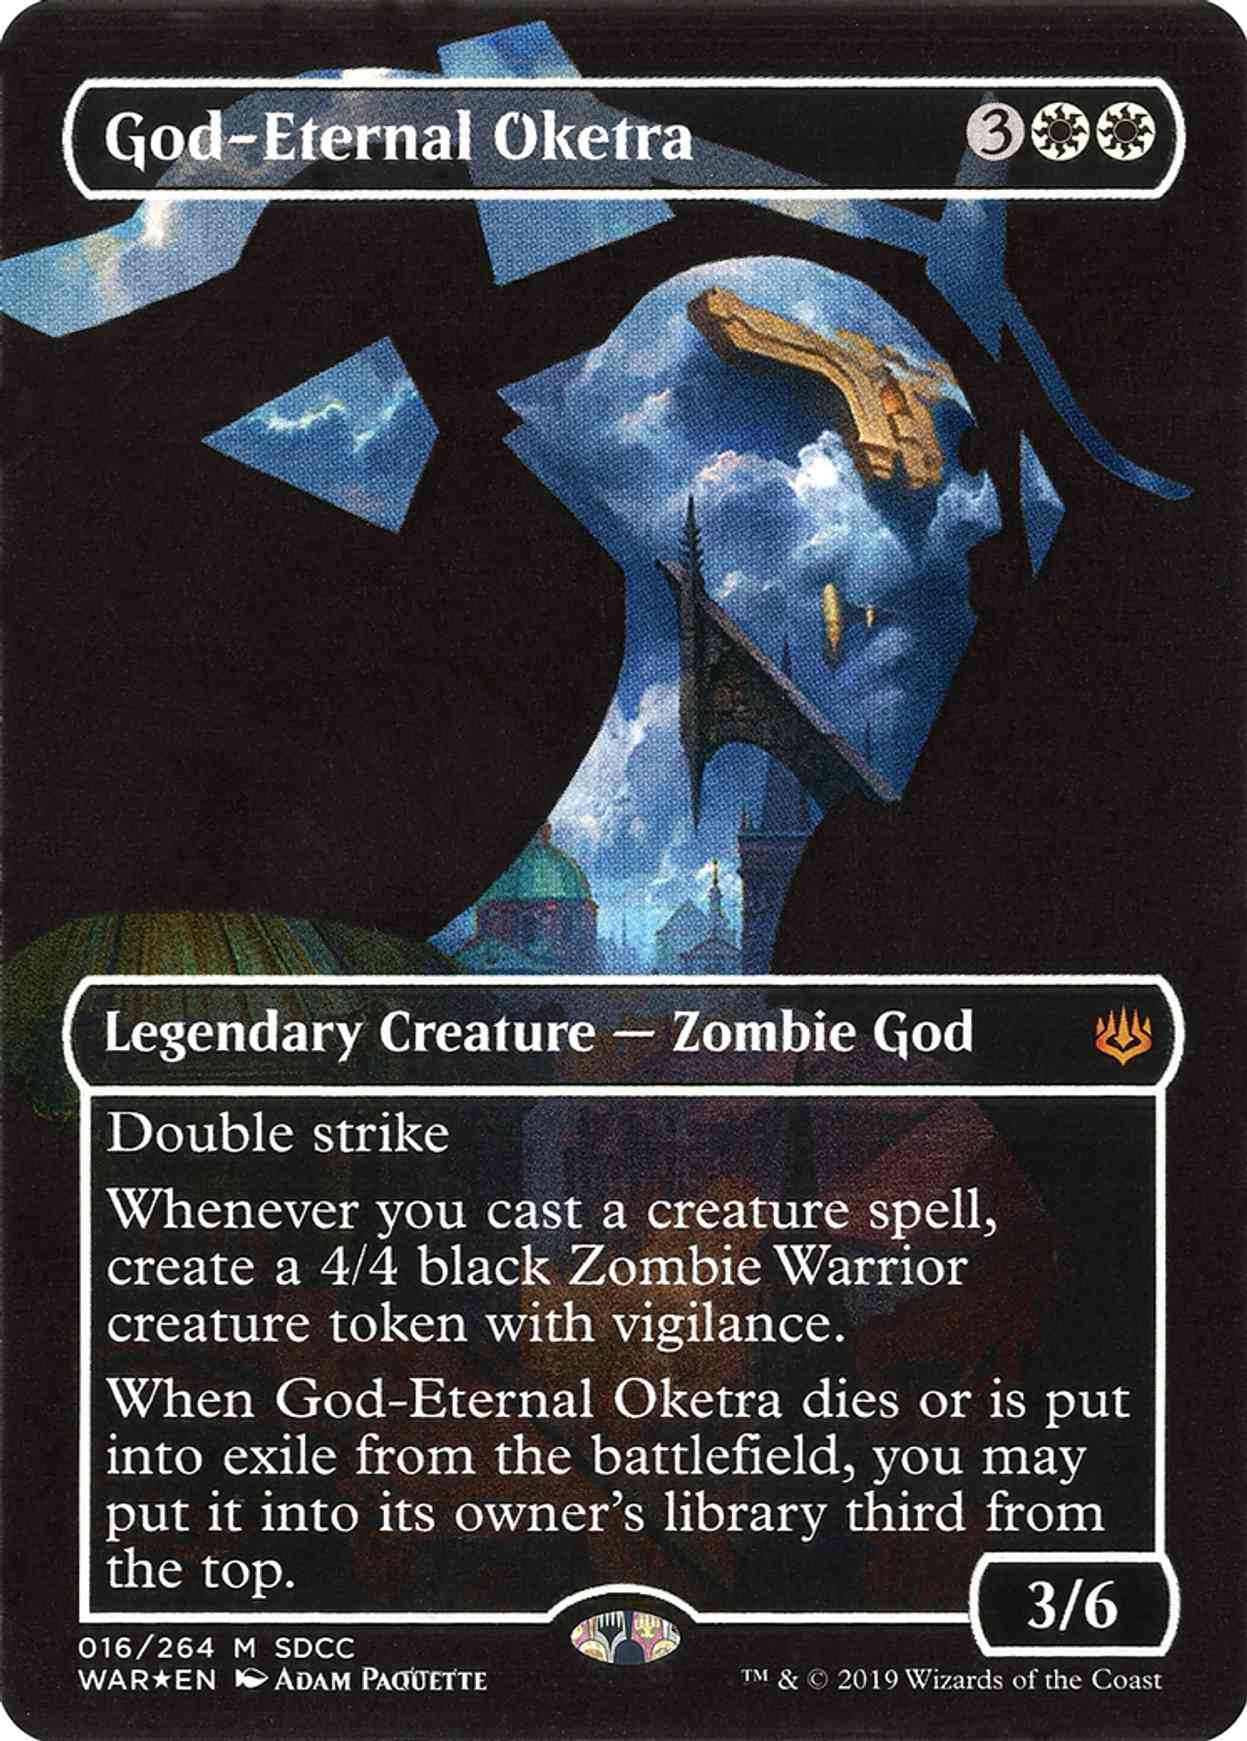 God-Eternal Oketra (SDCC 2019 Exclusive) magic card front